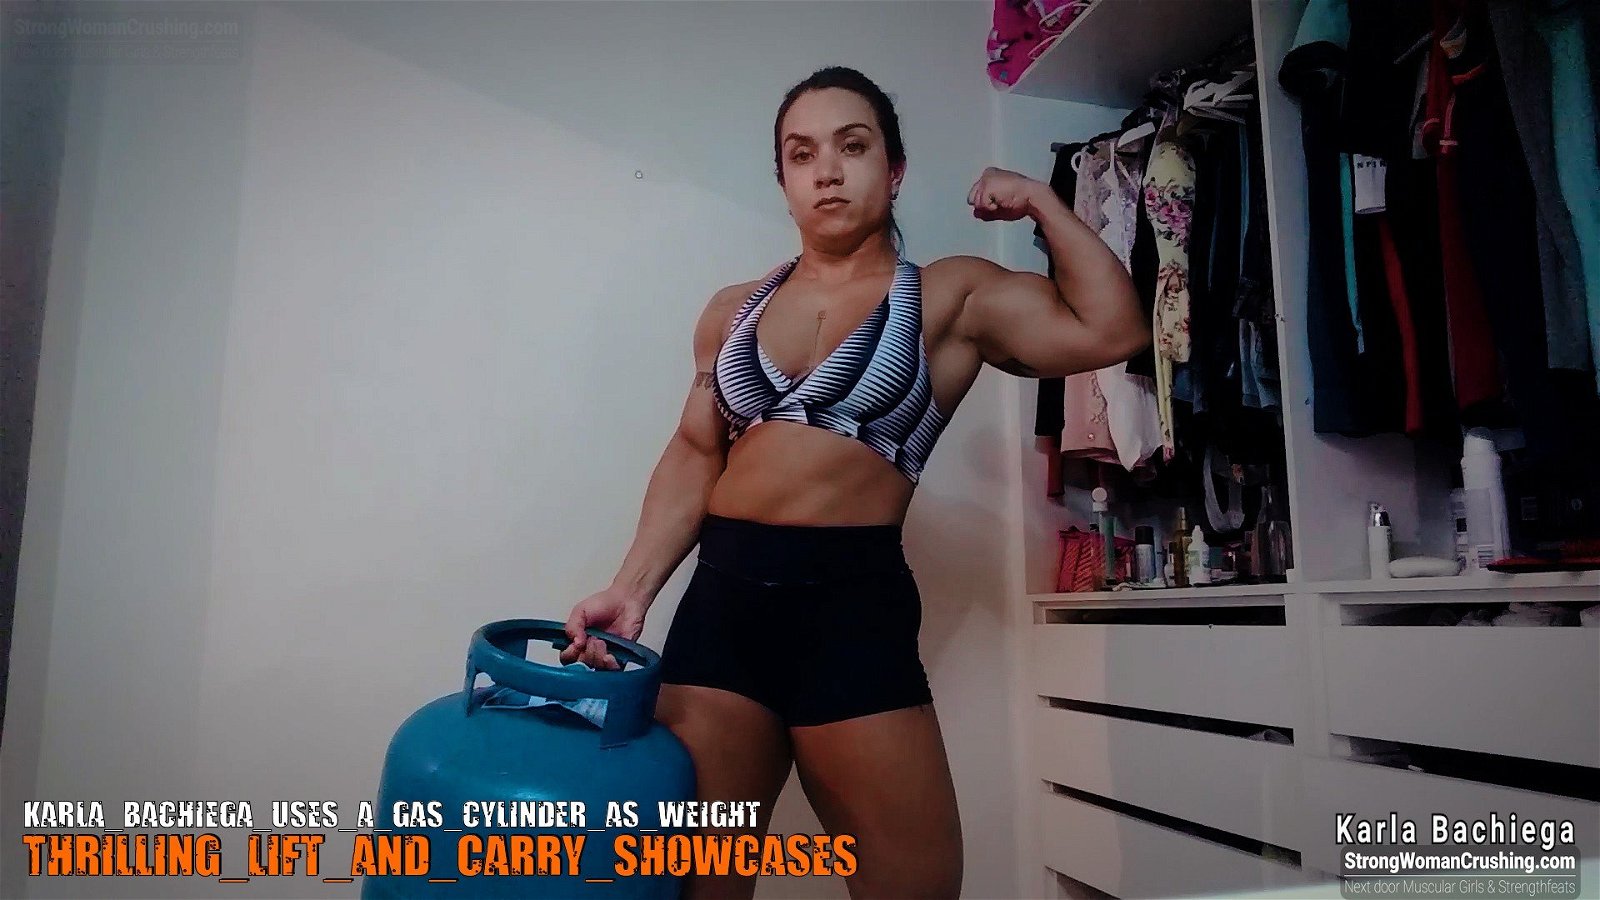 Photo by MusclegirlStrength with the username @MusclegirlStrength, who is a brand user,  September 17, 2023 at 4:52 AM and the text says '💪🏽 Get ready to be inspired! 🤩 Watch @KarlaBachiega use a gas cylinder as weight and become her strongest self! 🤩 Visit www.strongwomancrushing.com and get your membership today! 🤩 #StrongWomanCrushing #FitnessGoals #Inspiration #WomenEmpowerment..'